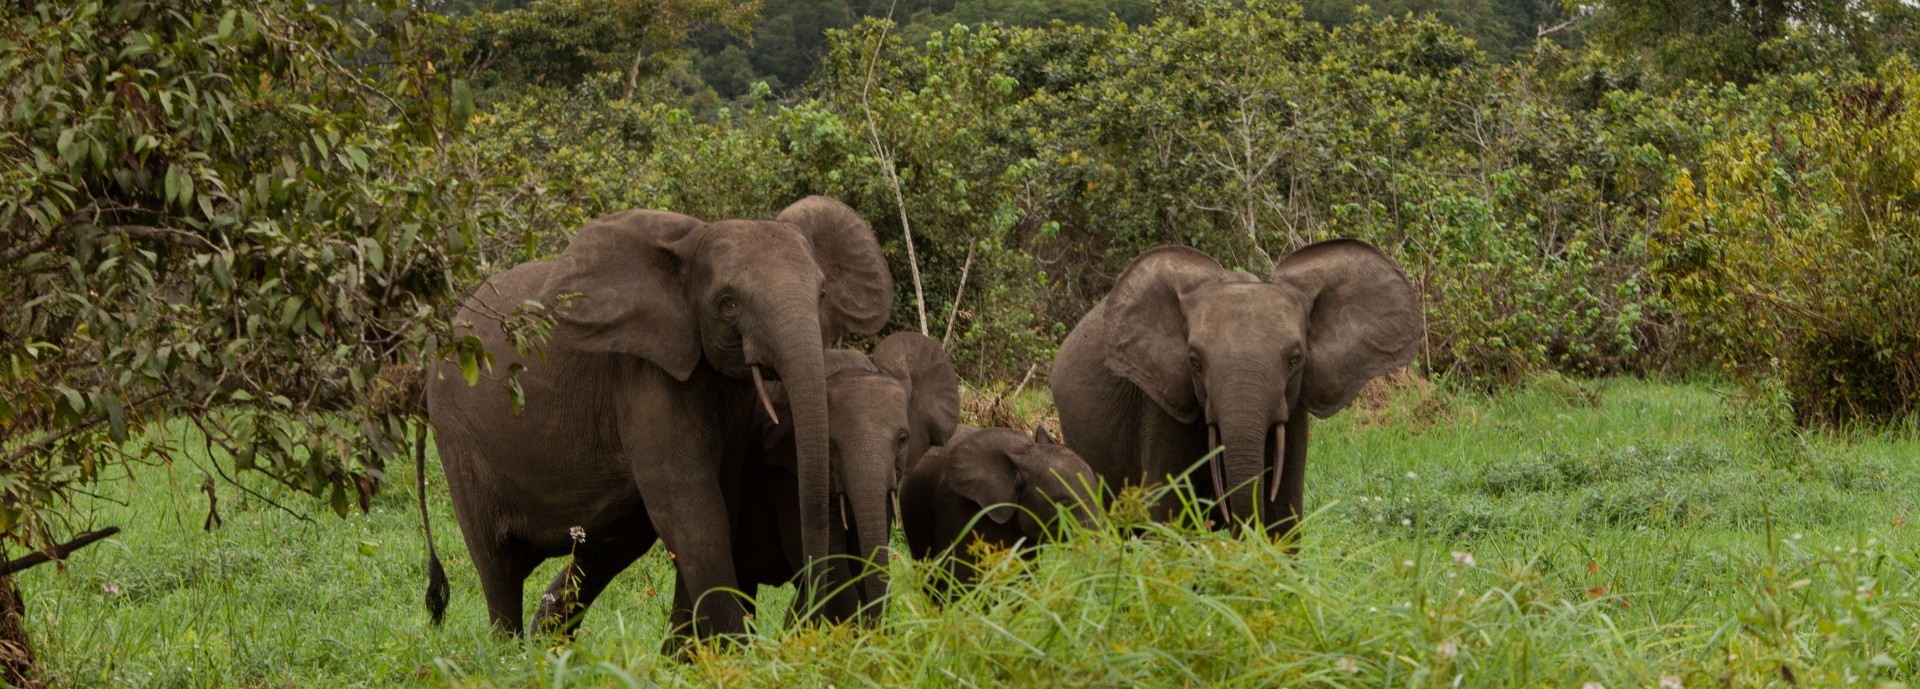 A family of elephants in the rainforest